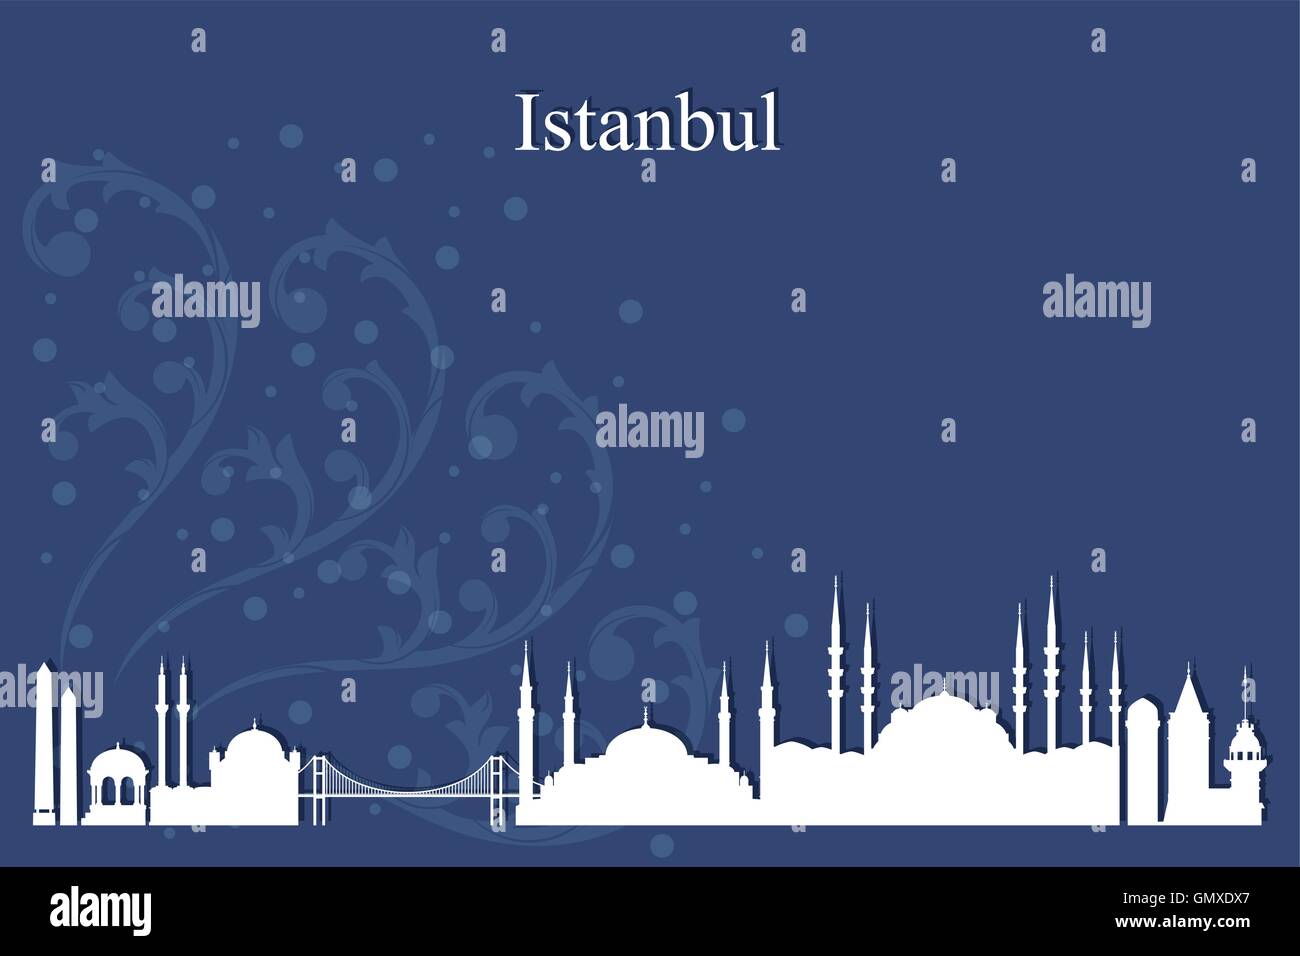 Istanbul city skyline silhouette on blue background Stock Vector